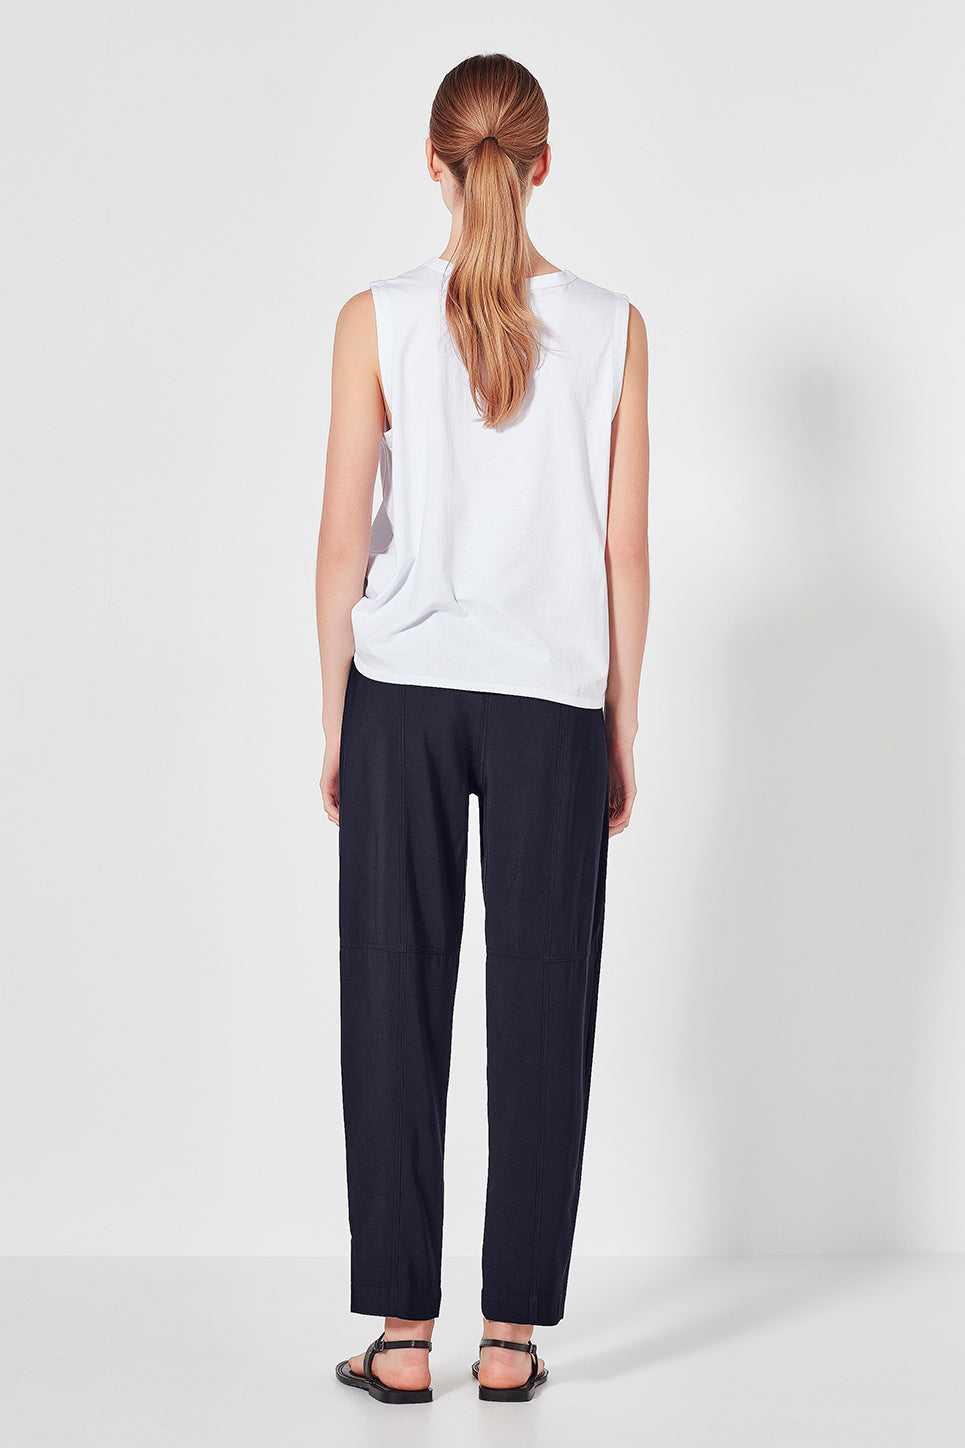 The Dorset Pant in Navy